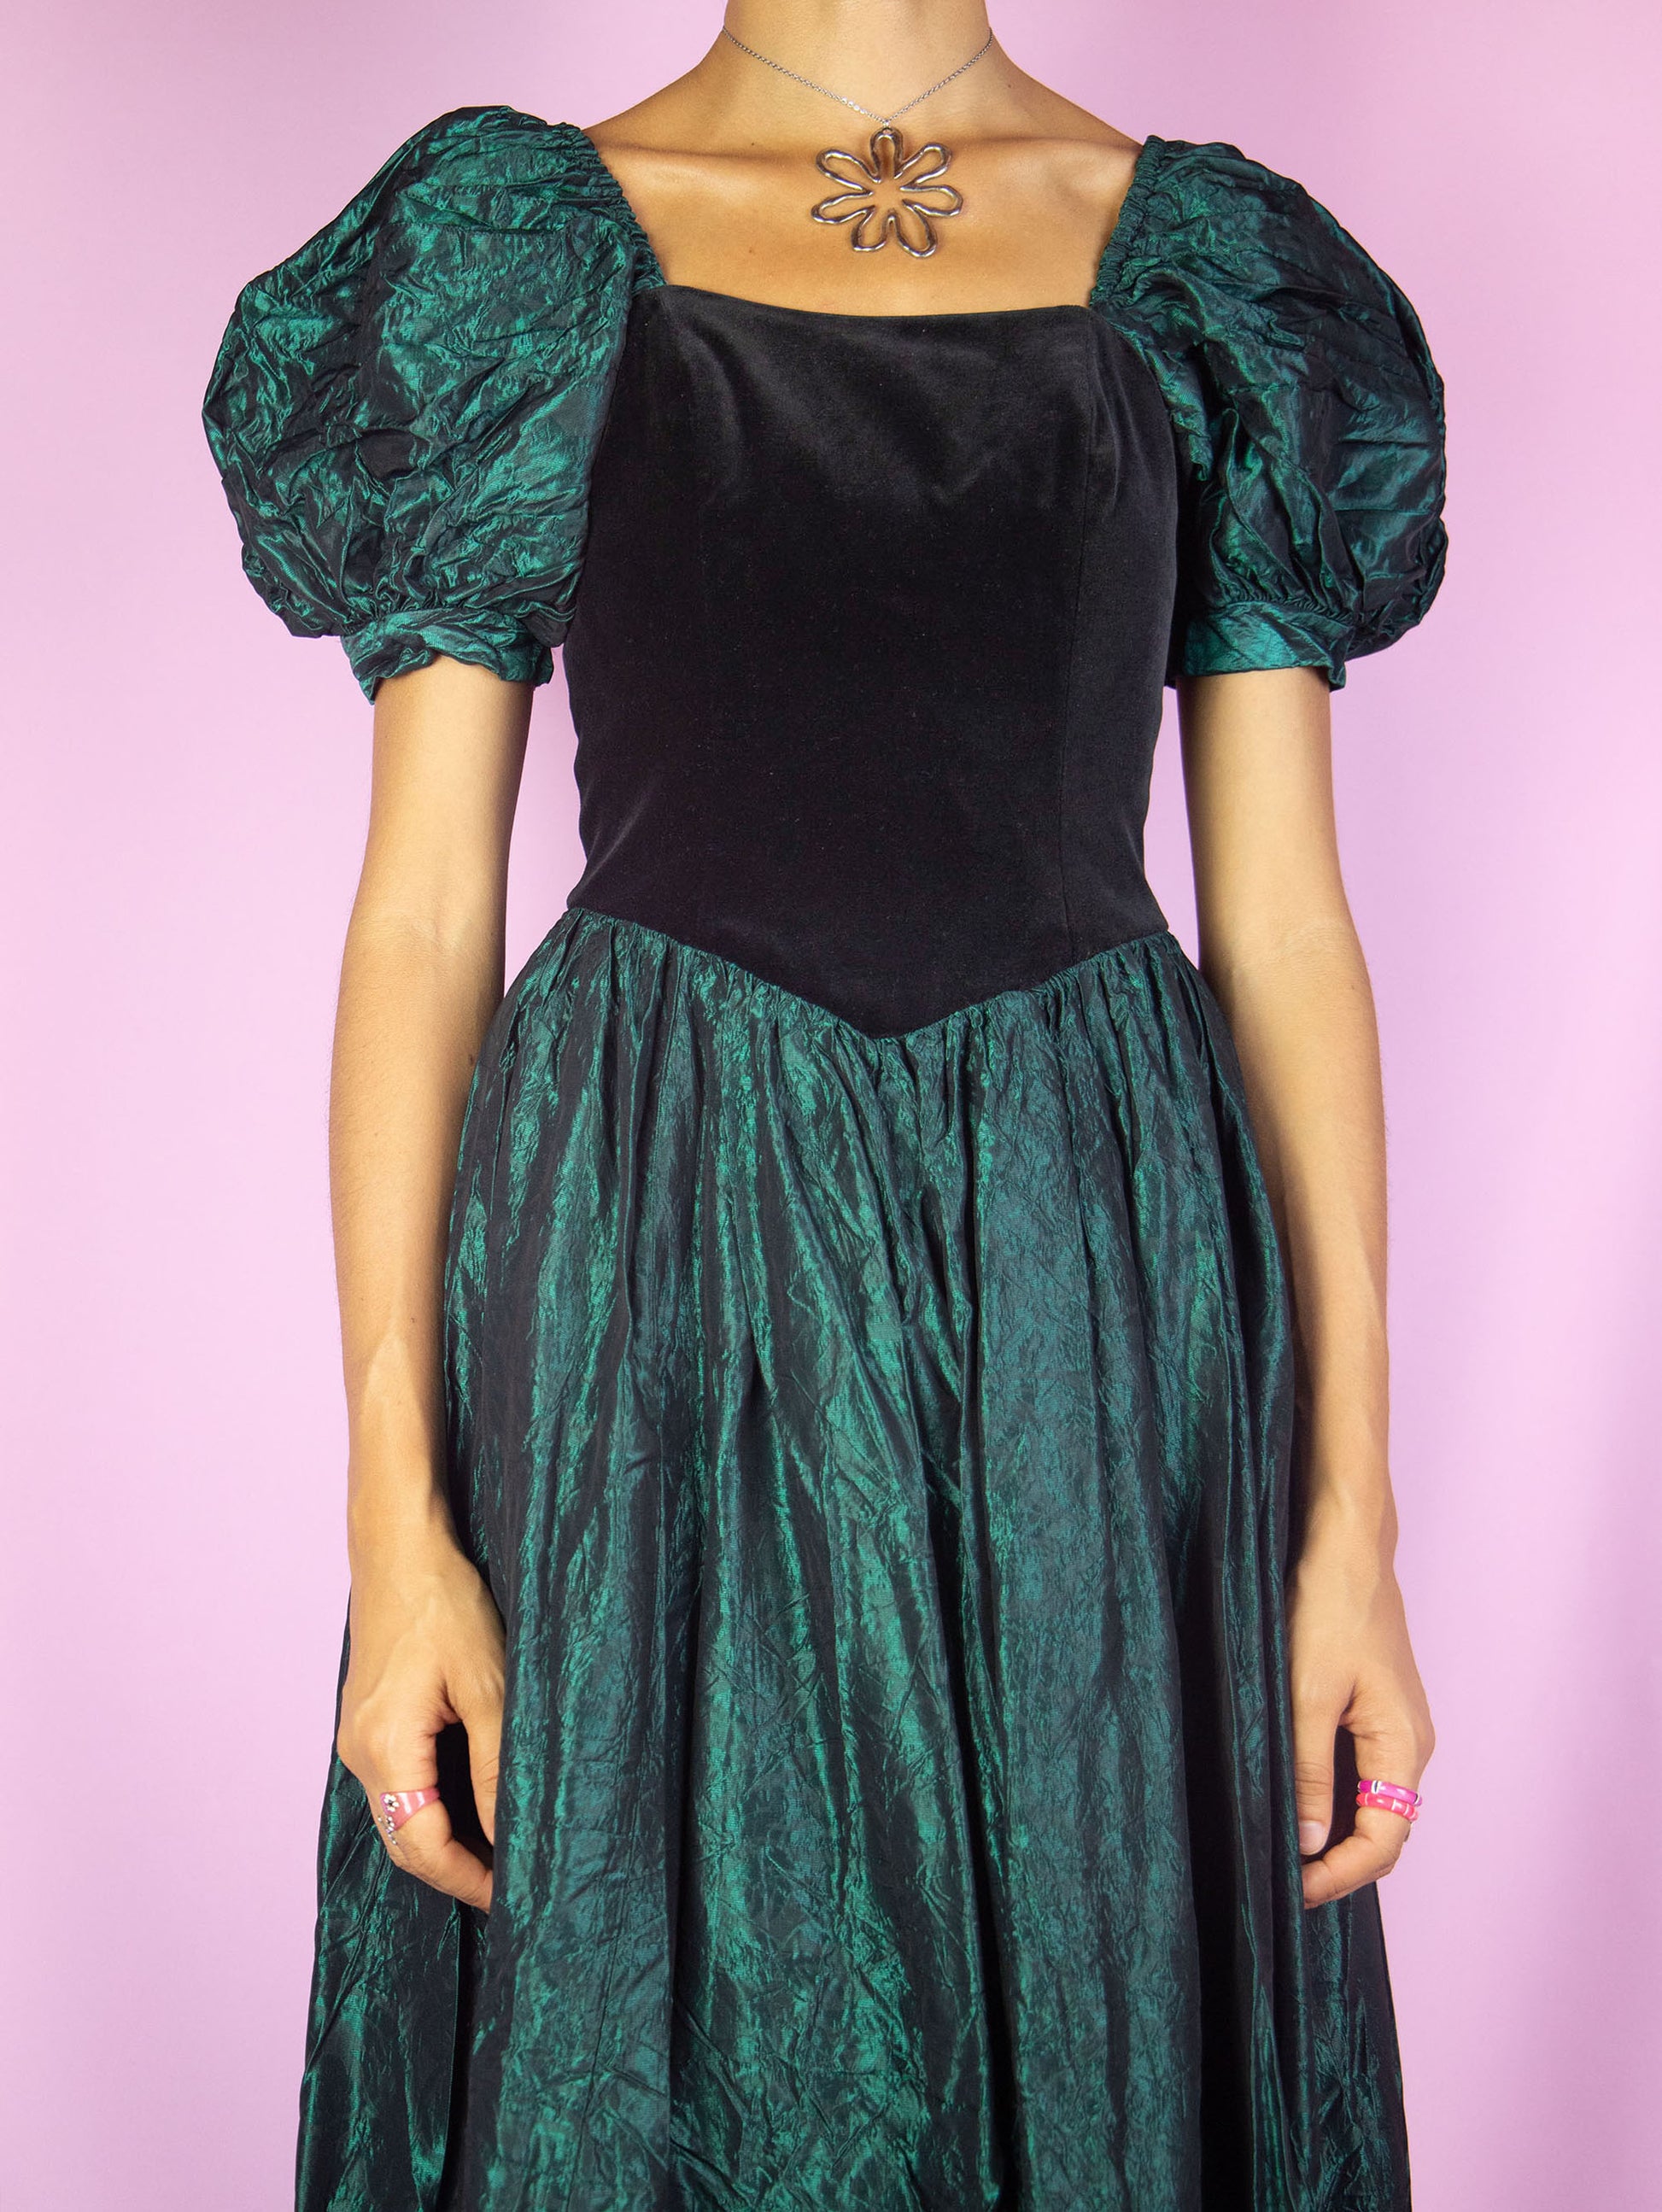 The Vintage 90s Puff Sleeve Midi Dress is an iridescent green flared dress with puff sleeves, black velvet front and back zipper closure. Cottage regency inspired 1990s dark romantic whimsygoth maxi dress.